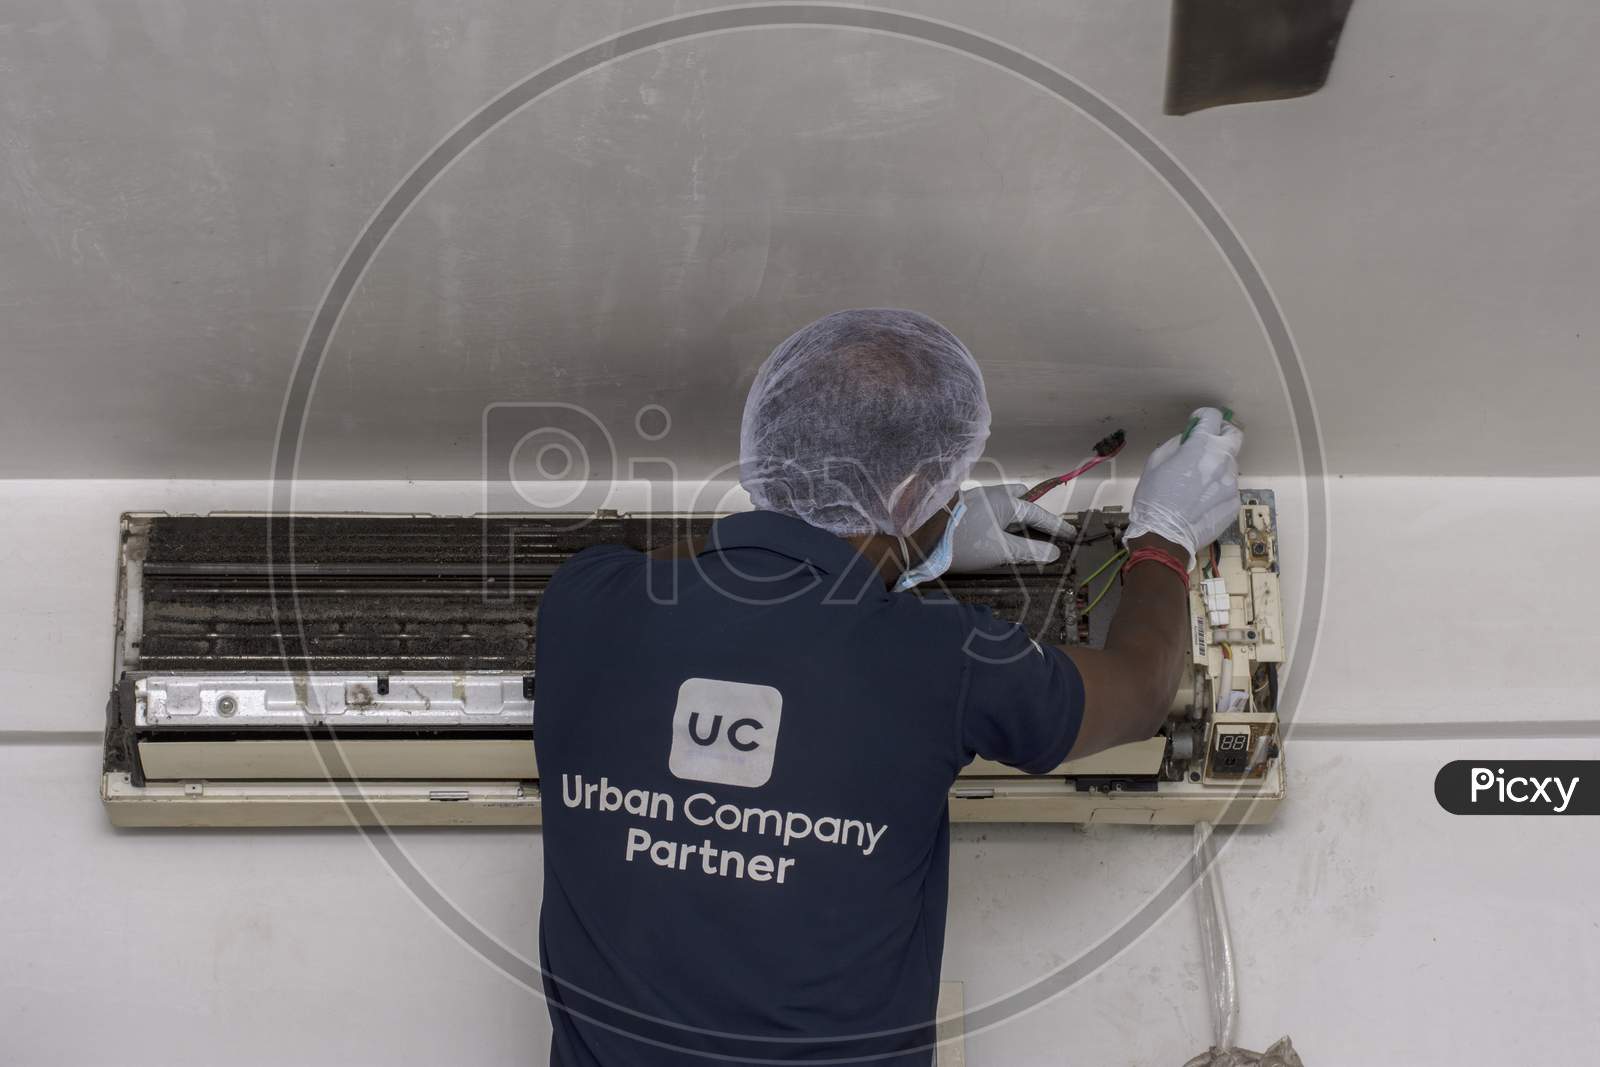 29Th May, 2021, Kolkata, West Bengal India: A Male Service Person From Urban Company Cleaning Air Condition Machine.